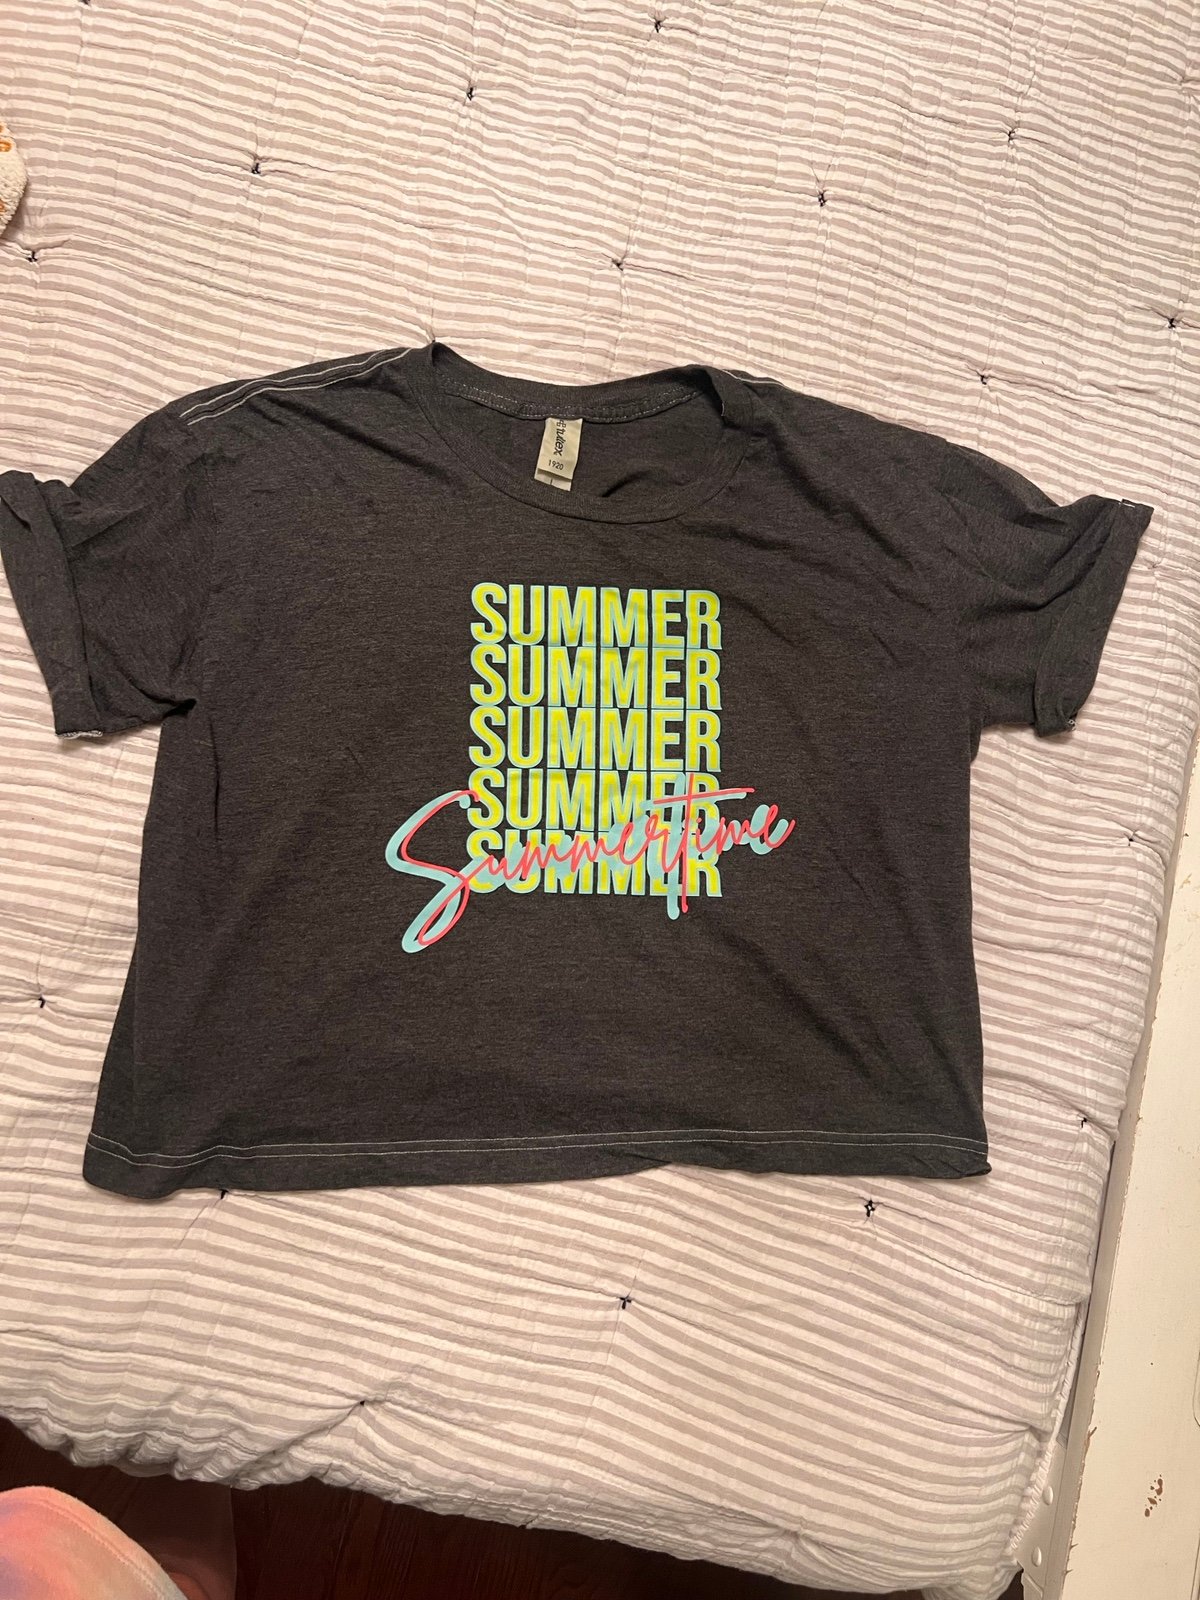 the Lowest price Boutique Summertime Crop Tee OEtW775vj